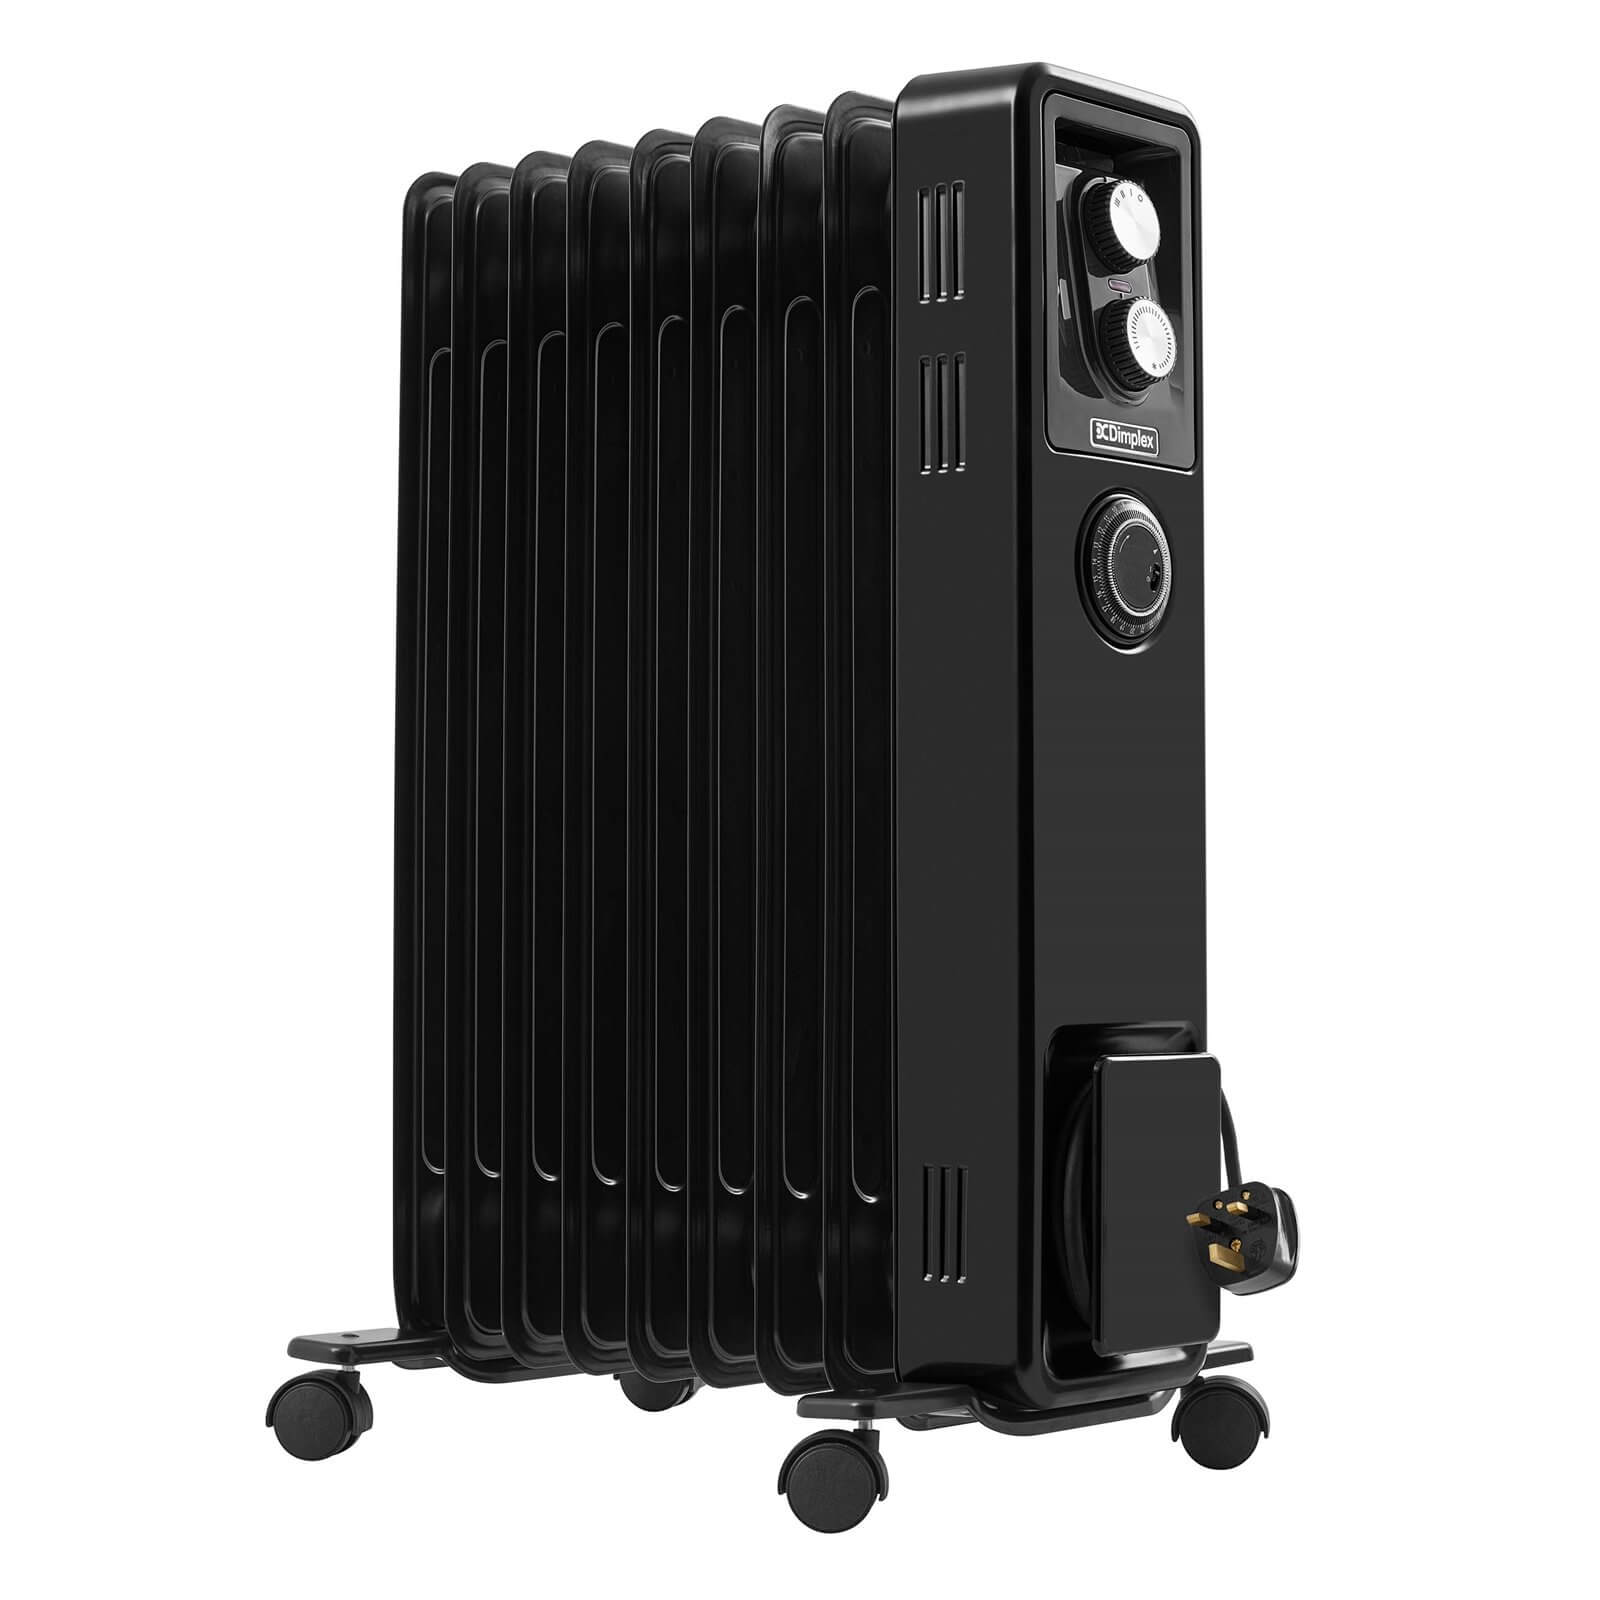 Dimplex 2kW Oil Radiator with 24 hour timer - Black